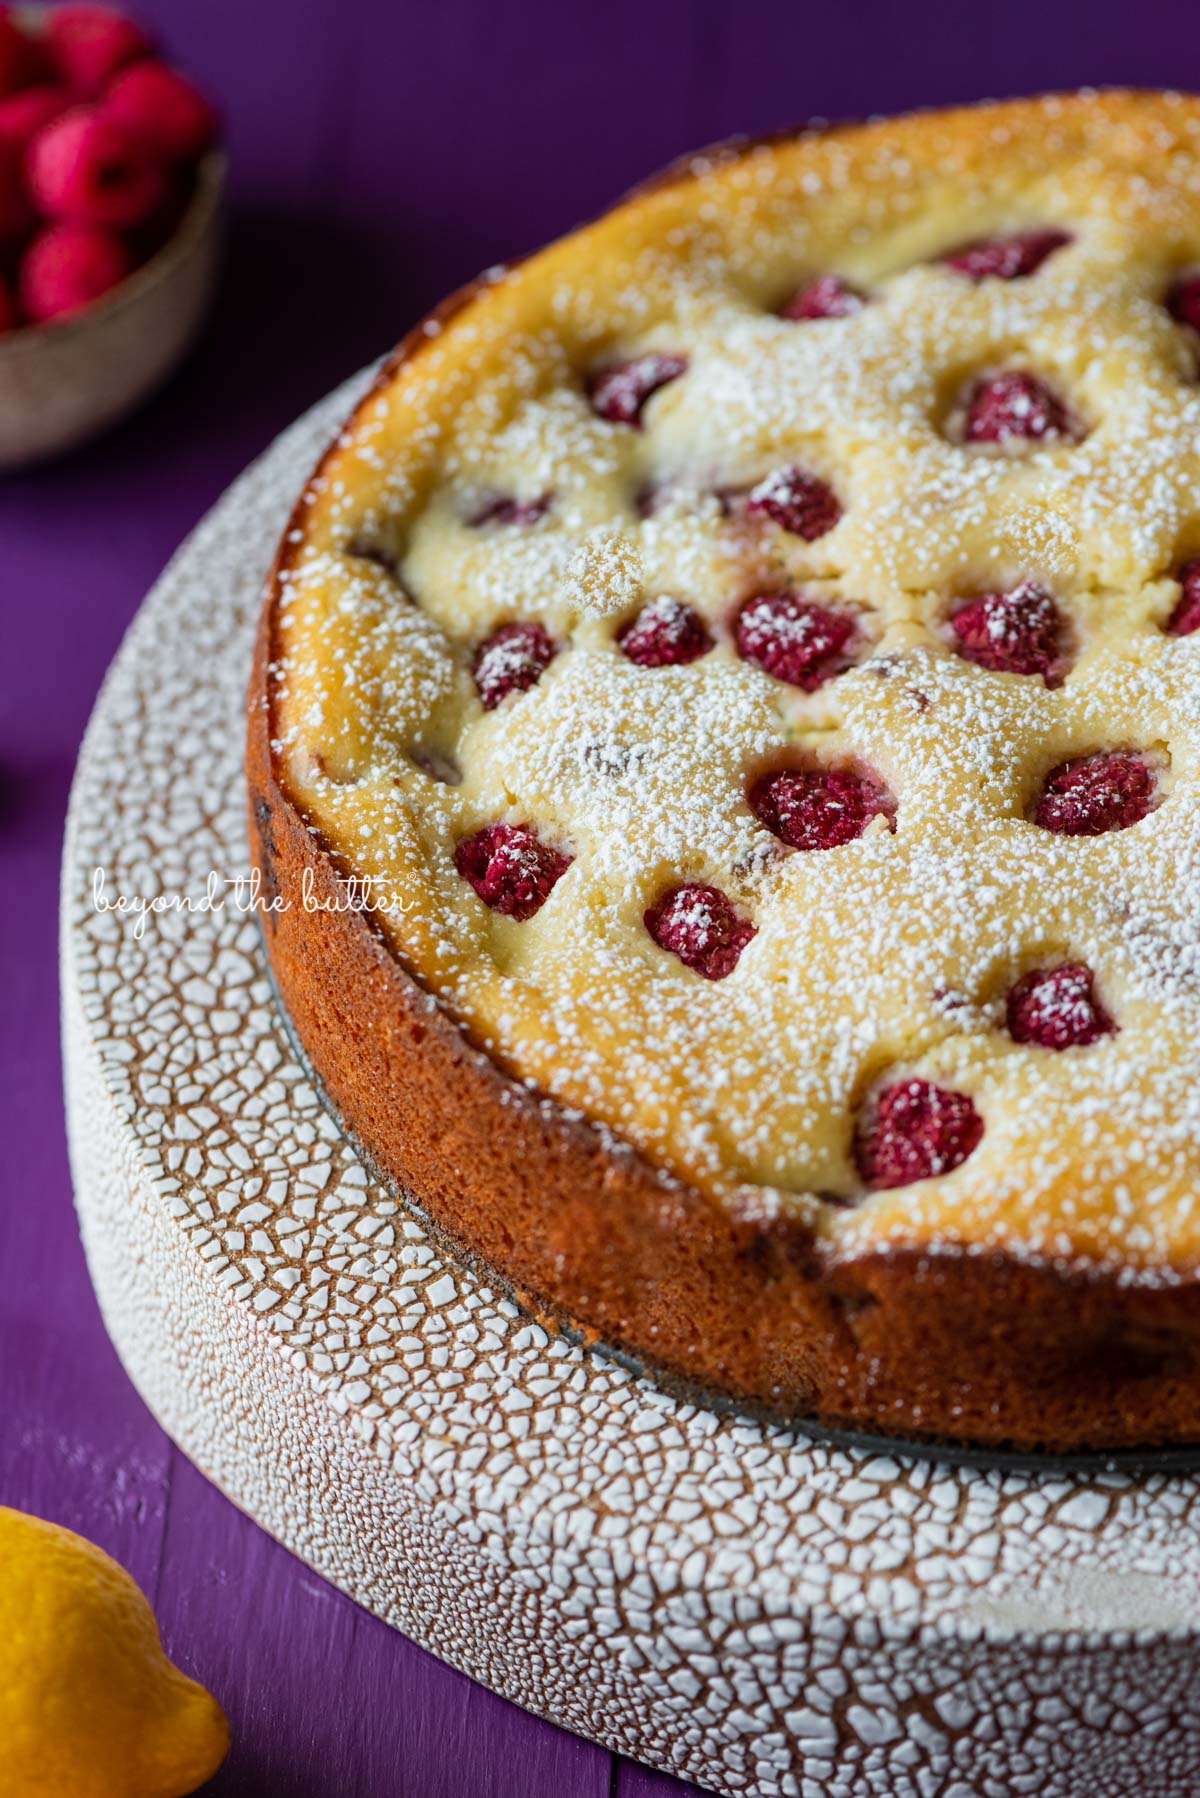 Lemon raspberry ricotta cake dusted with powdered sugar on crackled ceramic cake stand and purple wood background | © Beyond the Butter®